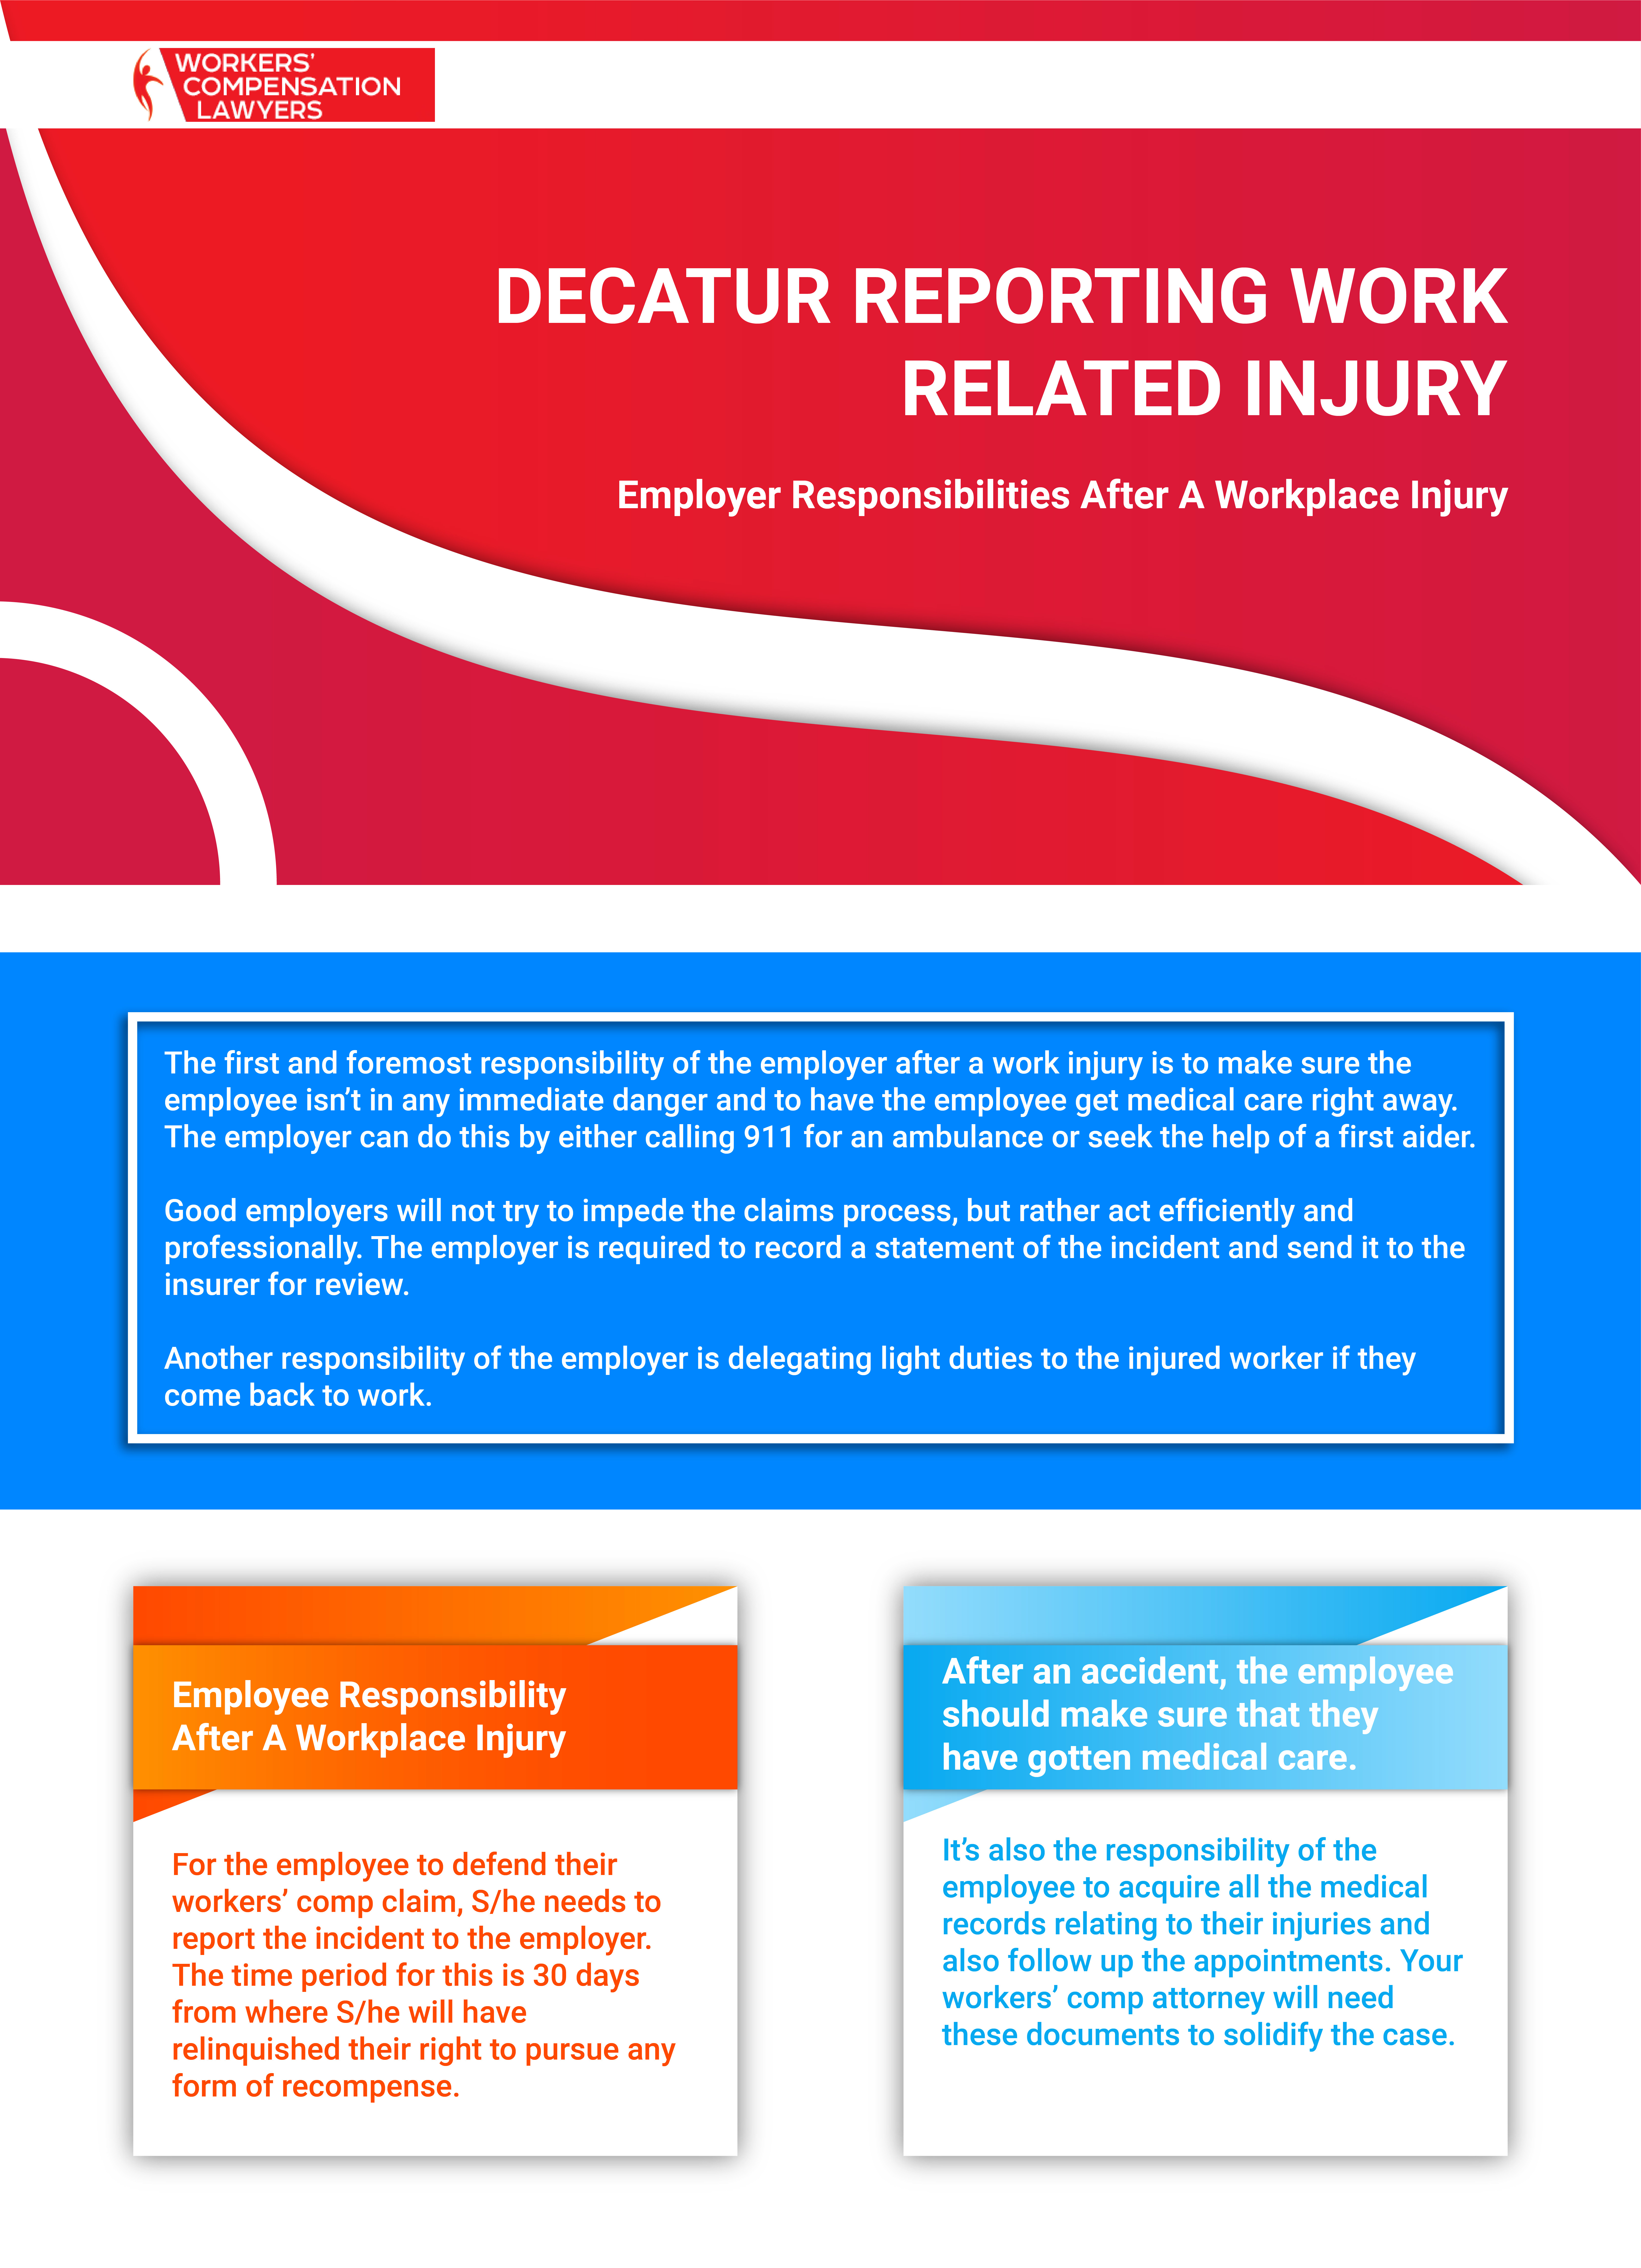 Decatur Reporting Work Related Injury Infographic